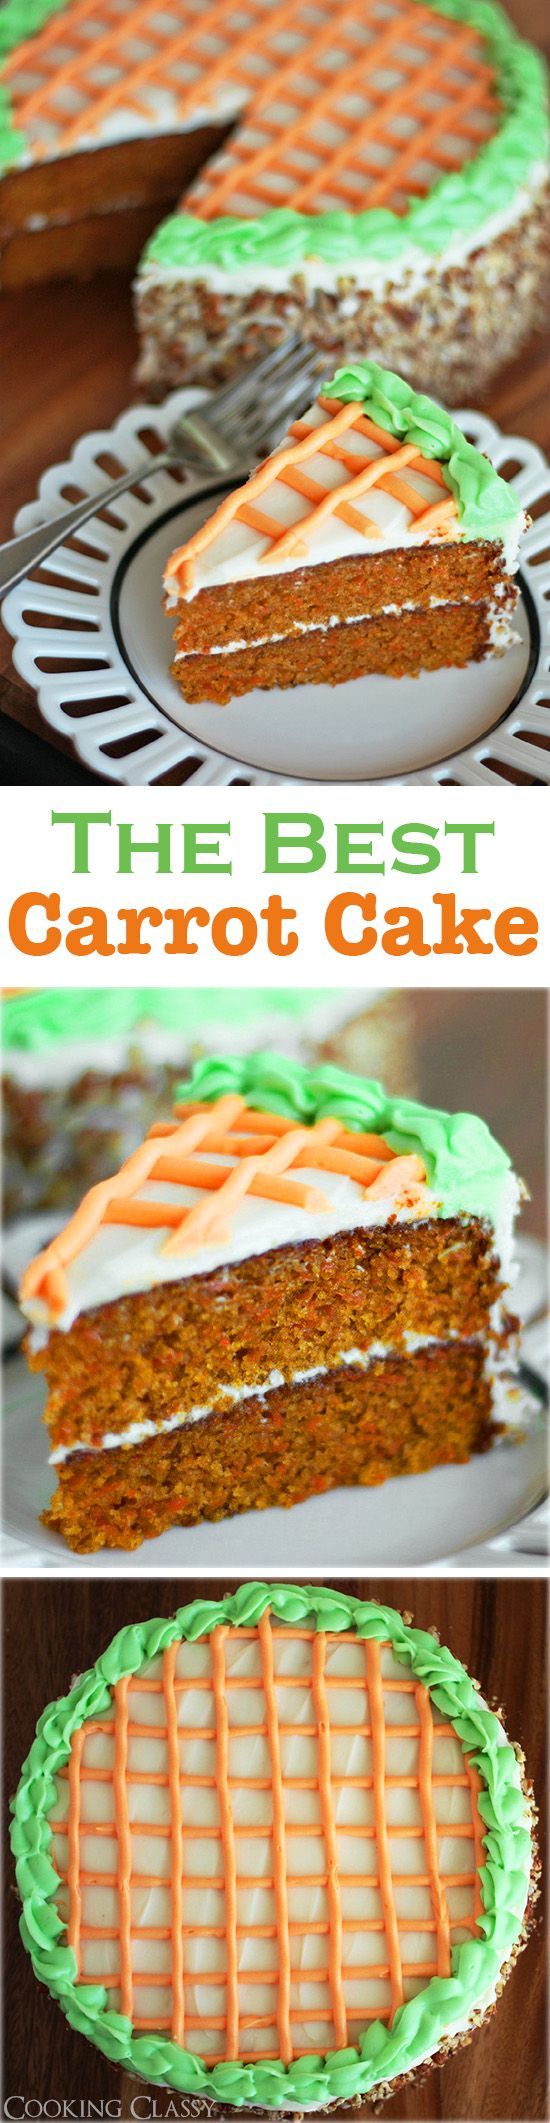 This is my FAVORITE carrot cake ever! I make this several times a year and its always a hit!